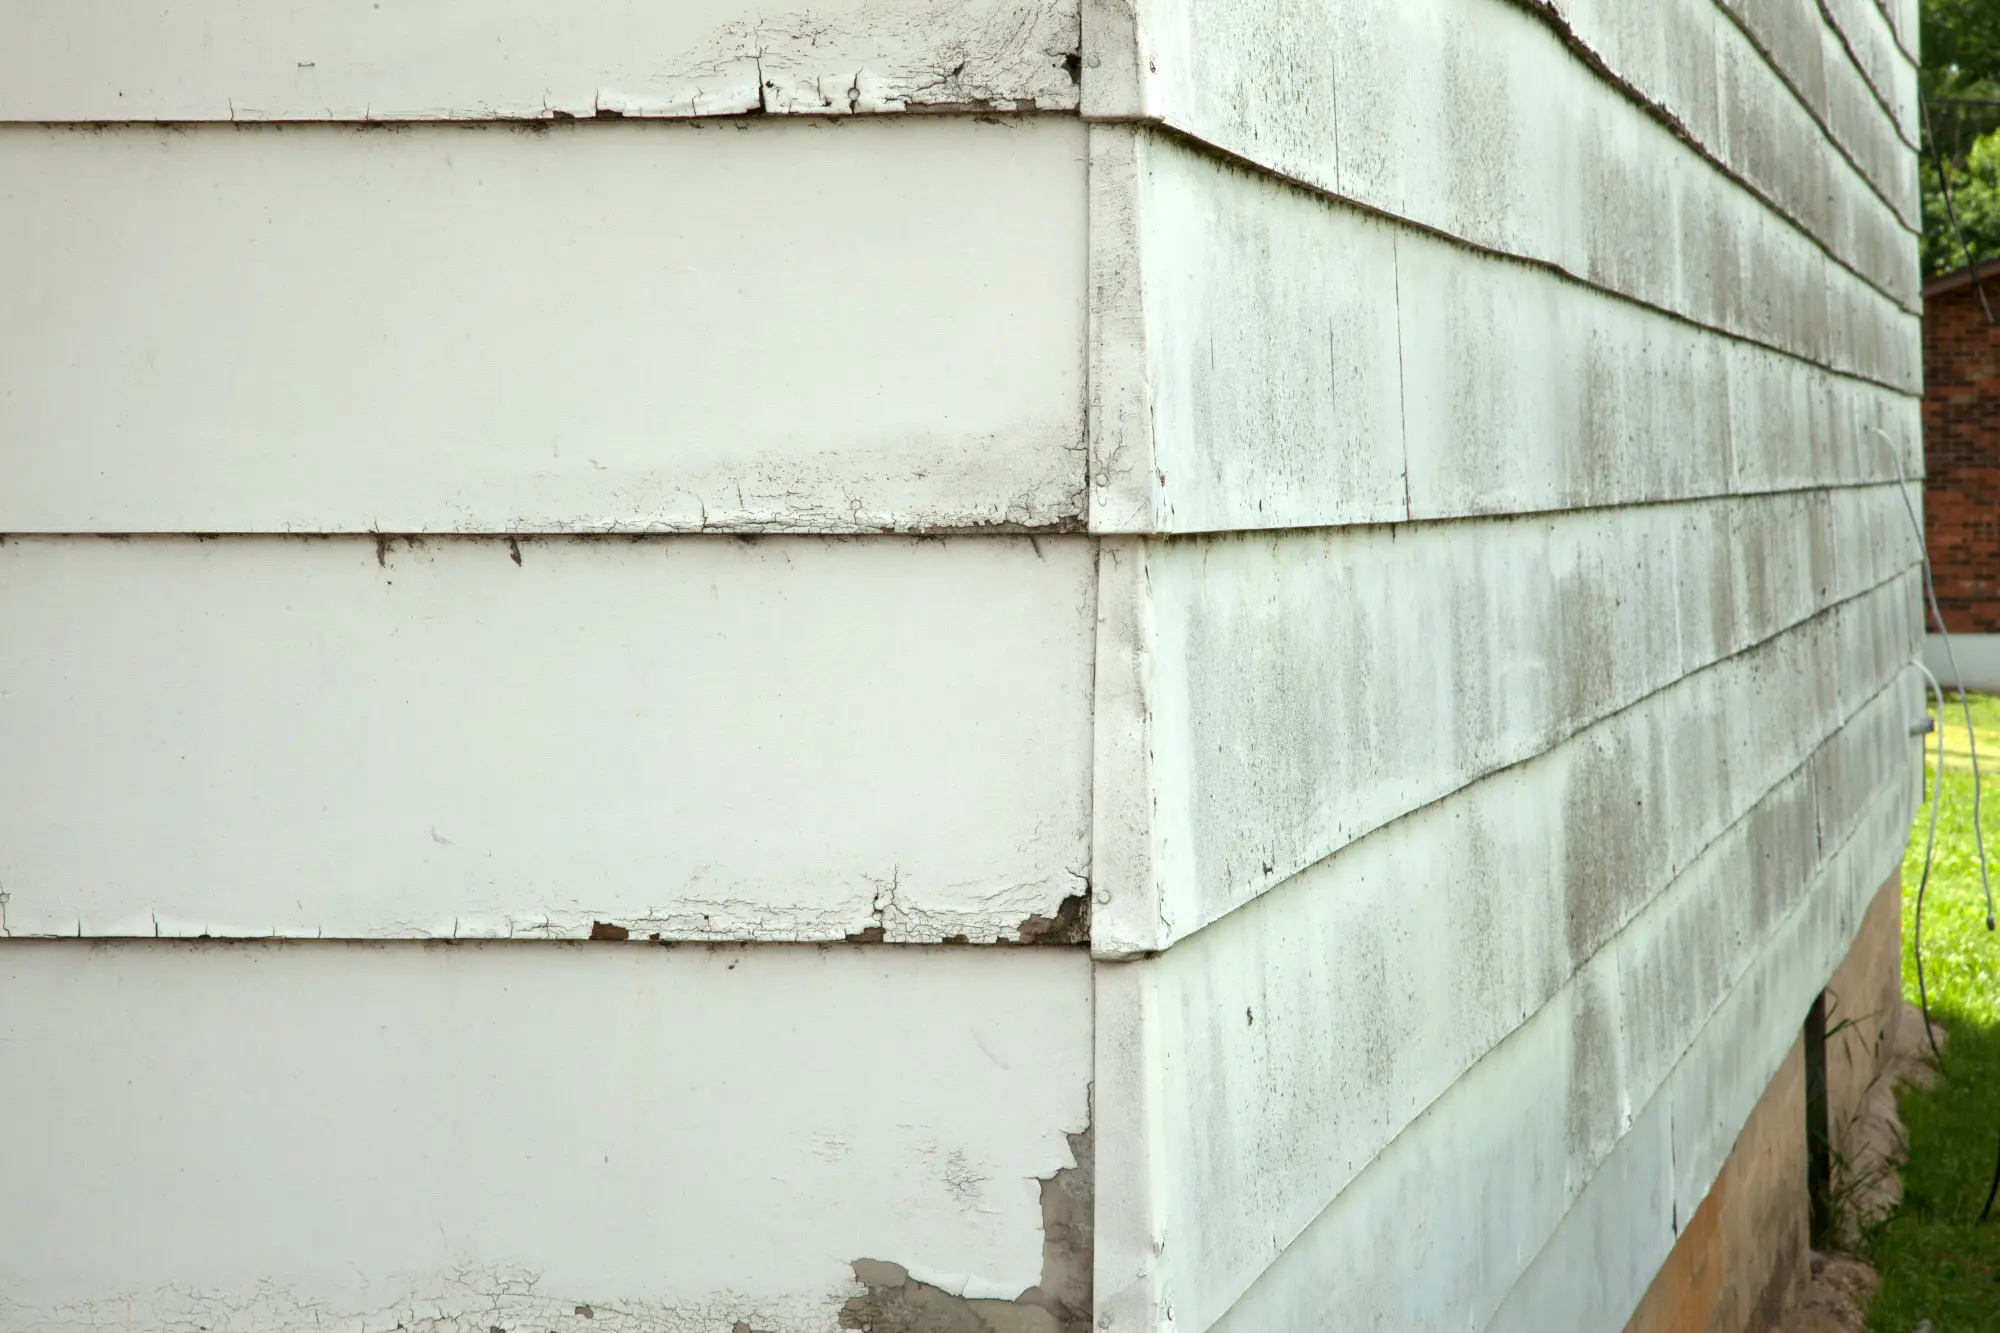 Mold and Mildew in masonite siding